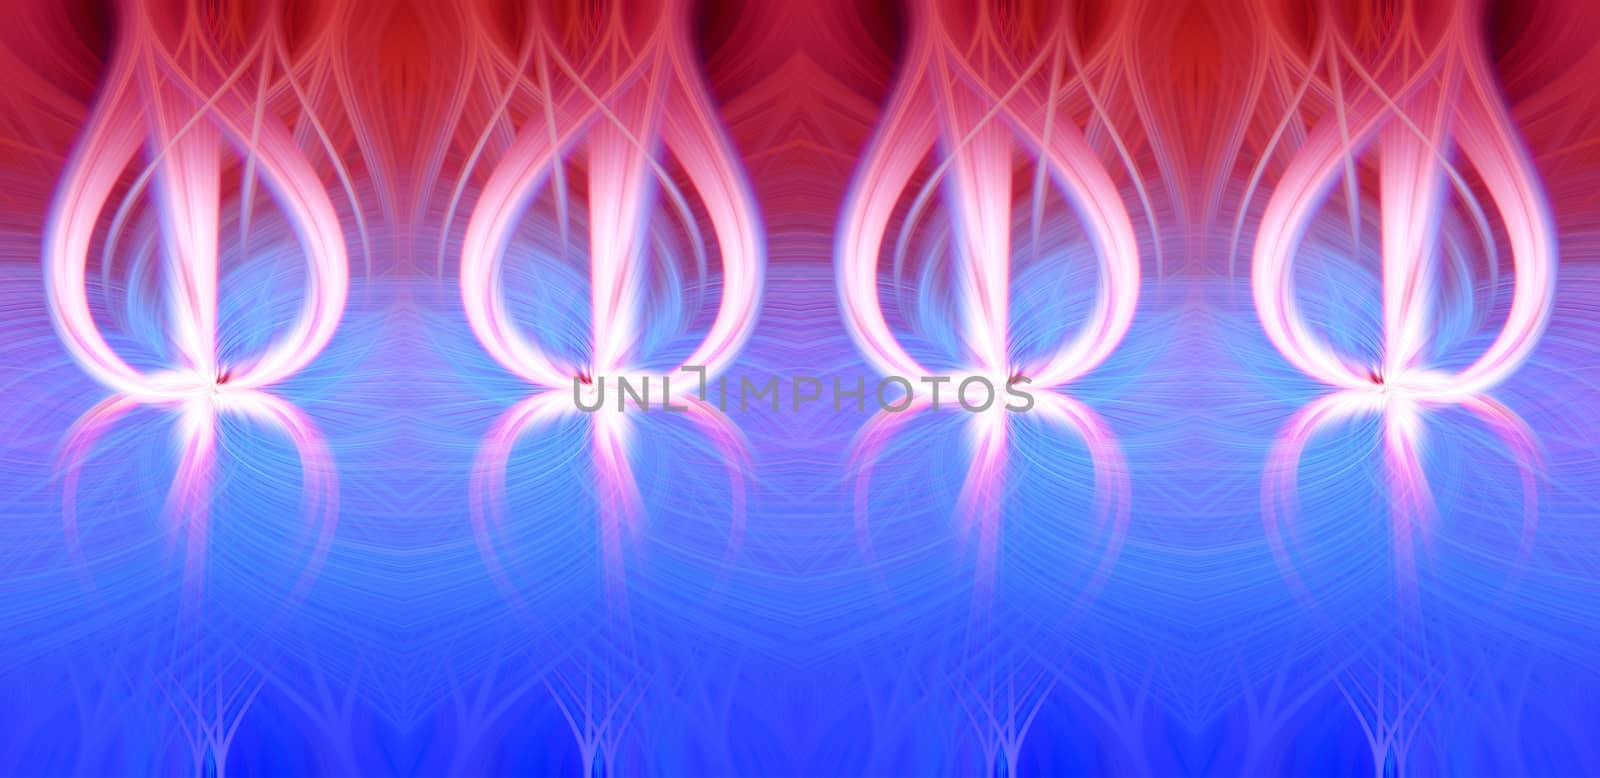 Beautiful abstract intertwined symmetrical 3d fibers forming a shape of sparkle, flame, flower, interlinked hearts. Pink, blue, maroon, and purple colors. Illustration.